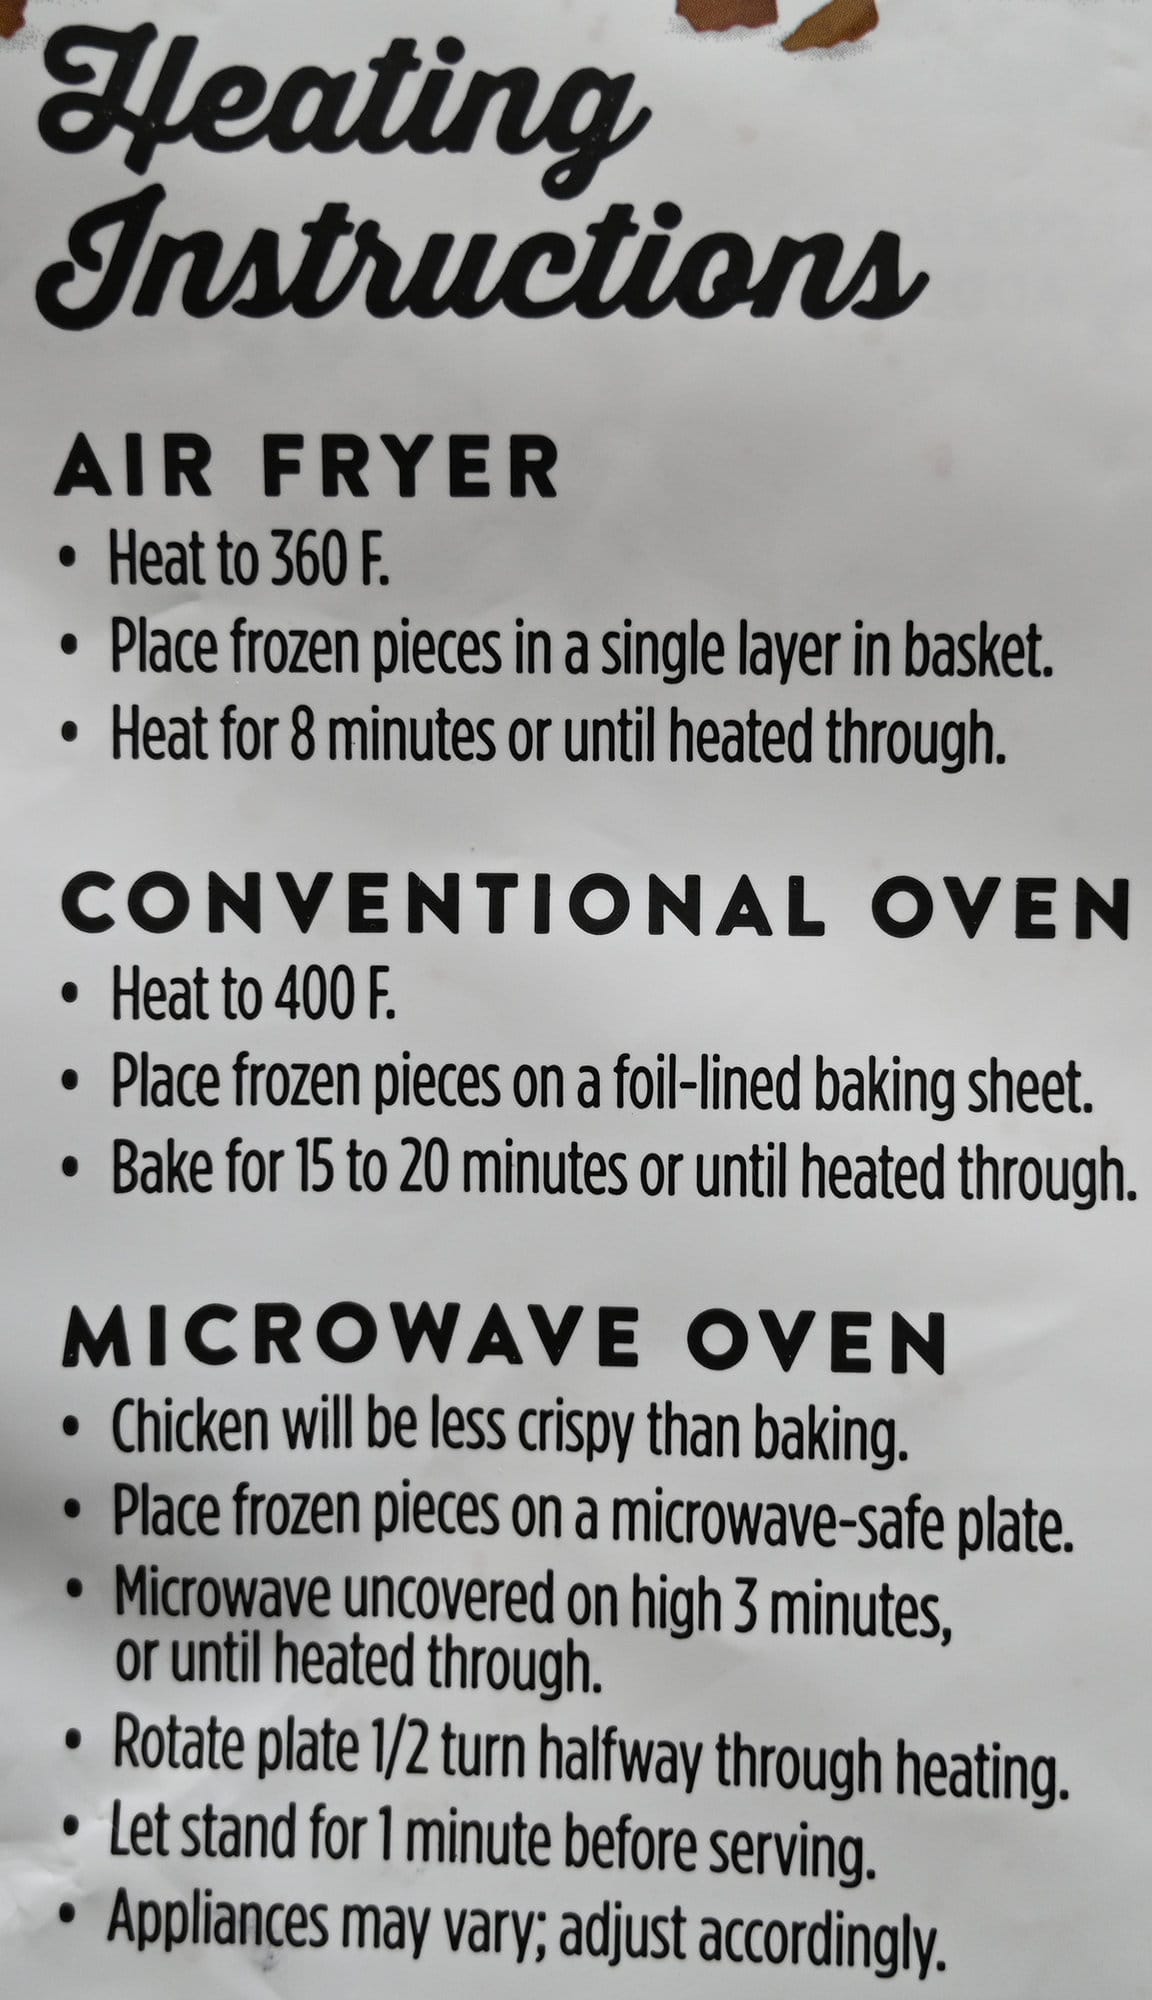 Image of the heating instructions for the chicken breast chunks from the back of the bag.